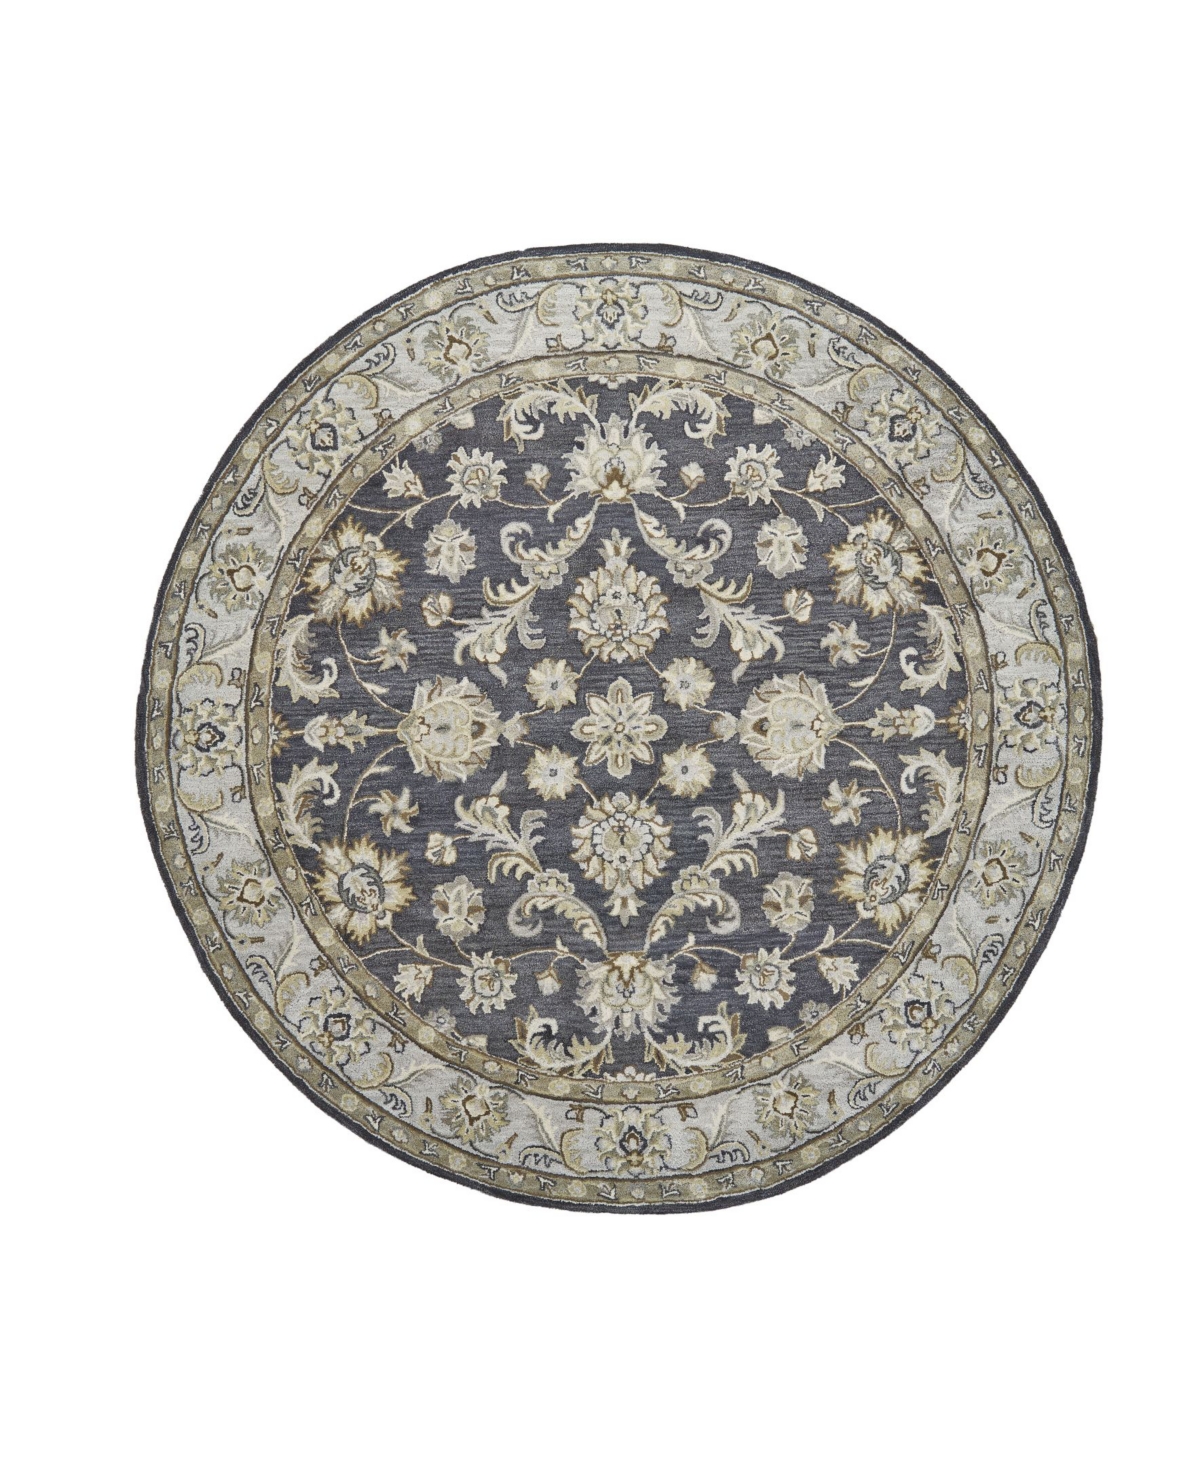 Feizy Zoie R8397 Charcoal 8' x 8' Round Rug - Charcoal